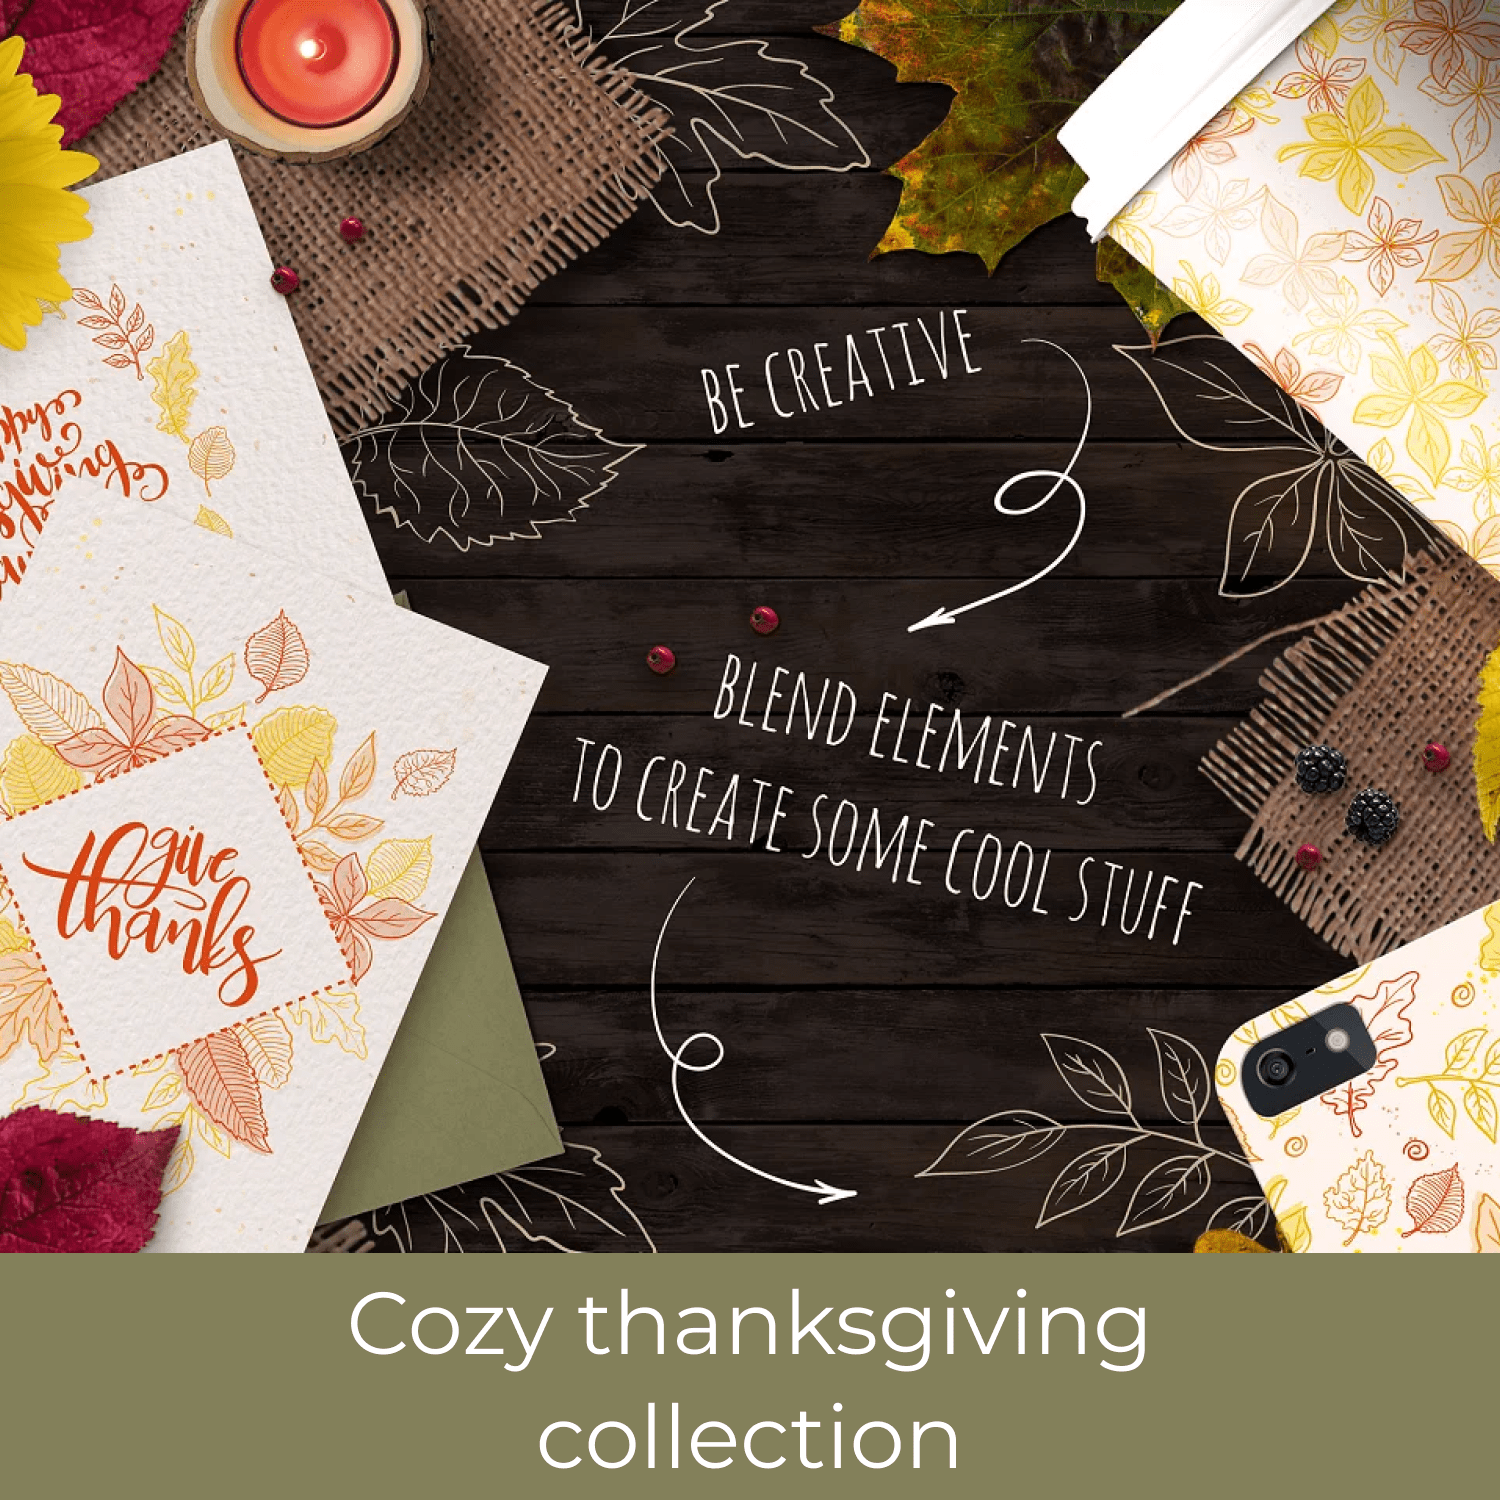 Cozy thanksgiving collection cover.